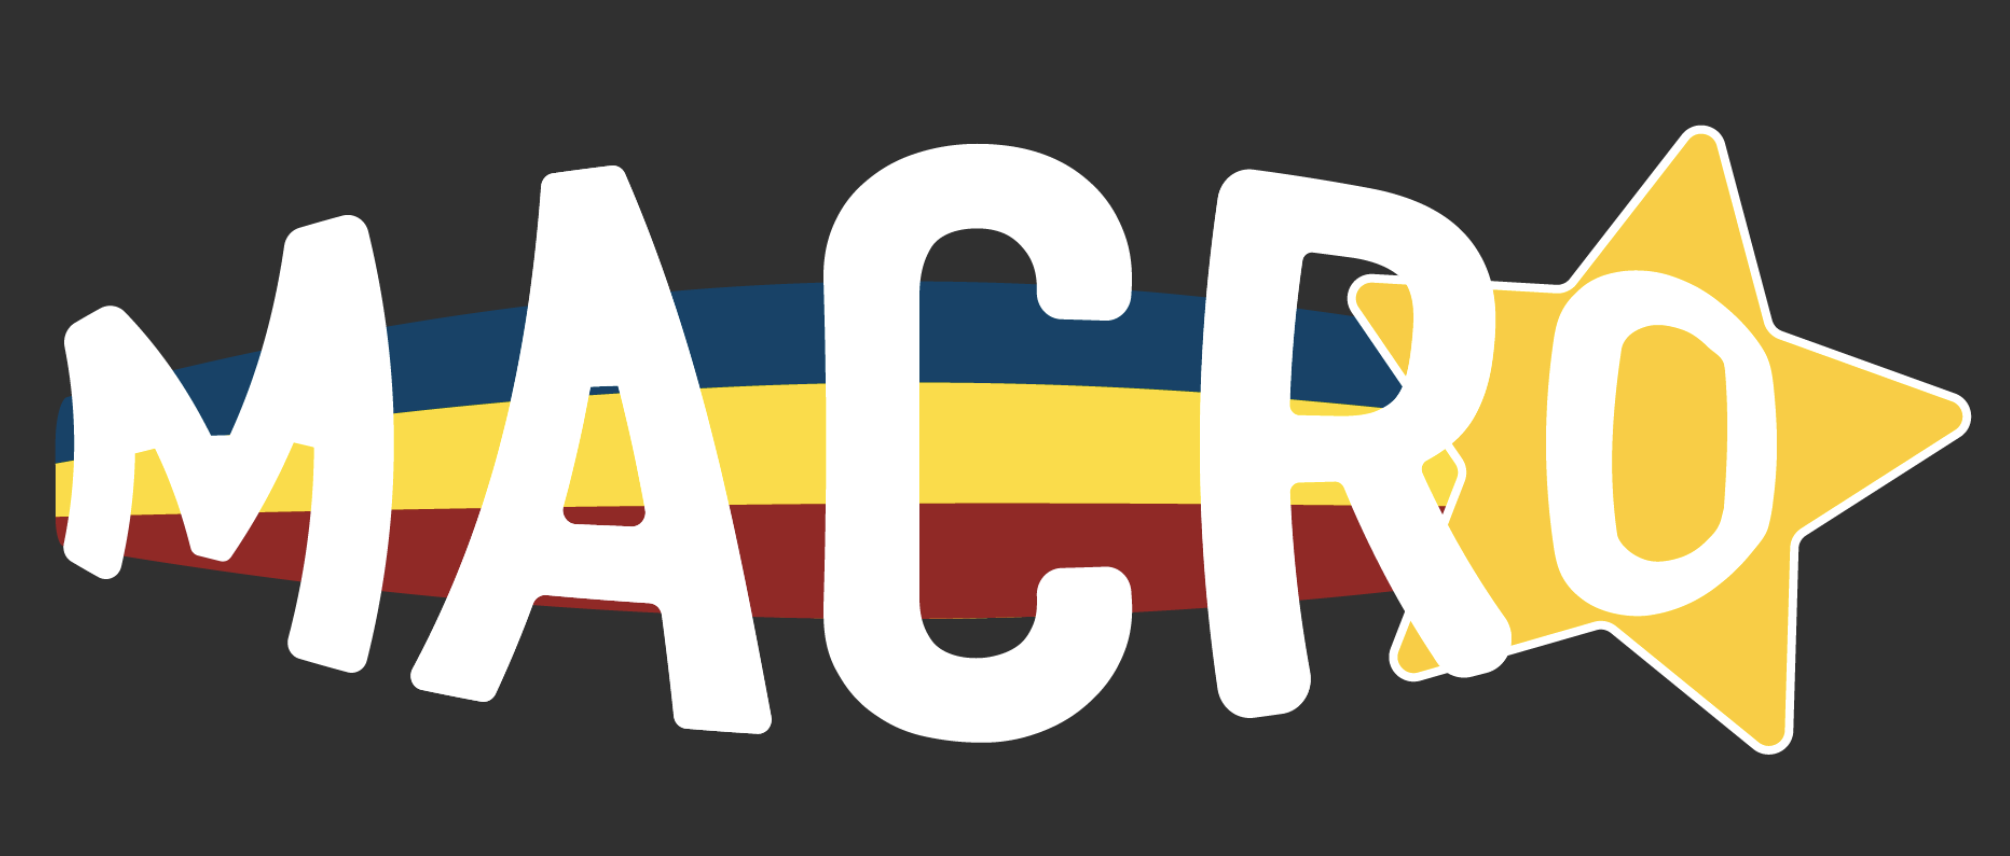 The MACRO logo. White lettering is superimposed on a dark gray background and a yellow star moving right with with blue, yellow, and red streaks coming out of it; the colors of the MACRO institutions.